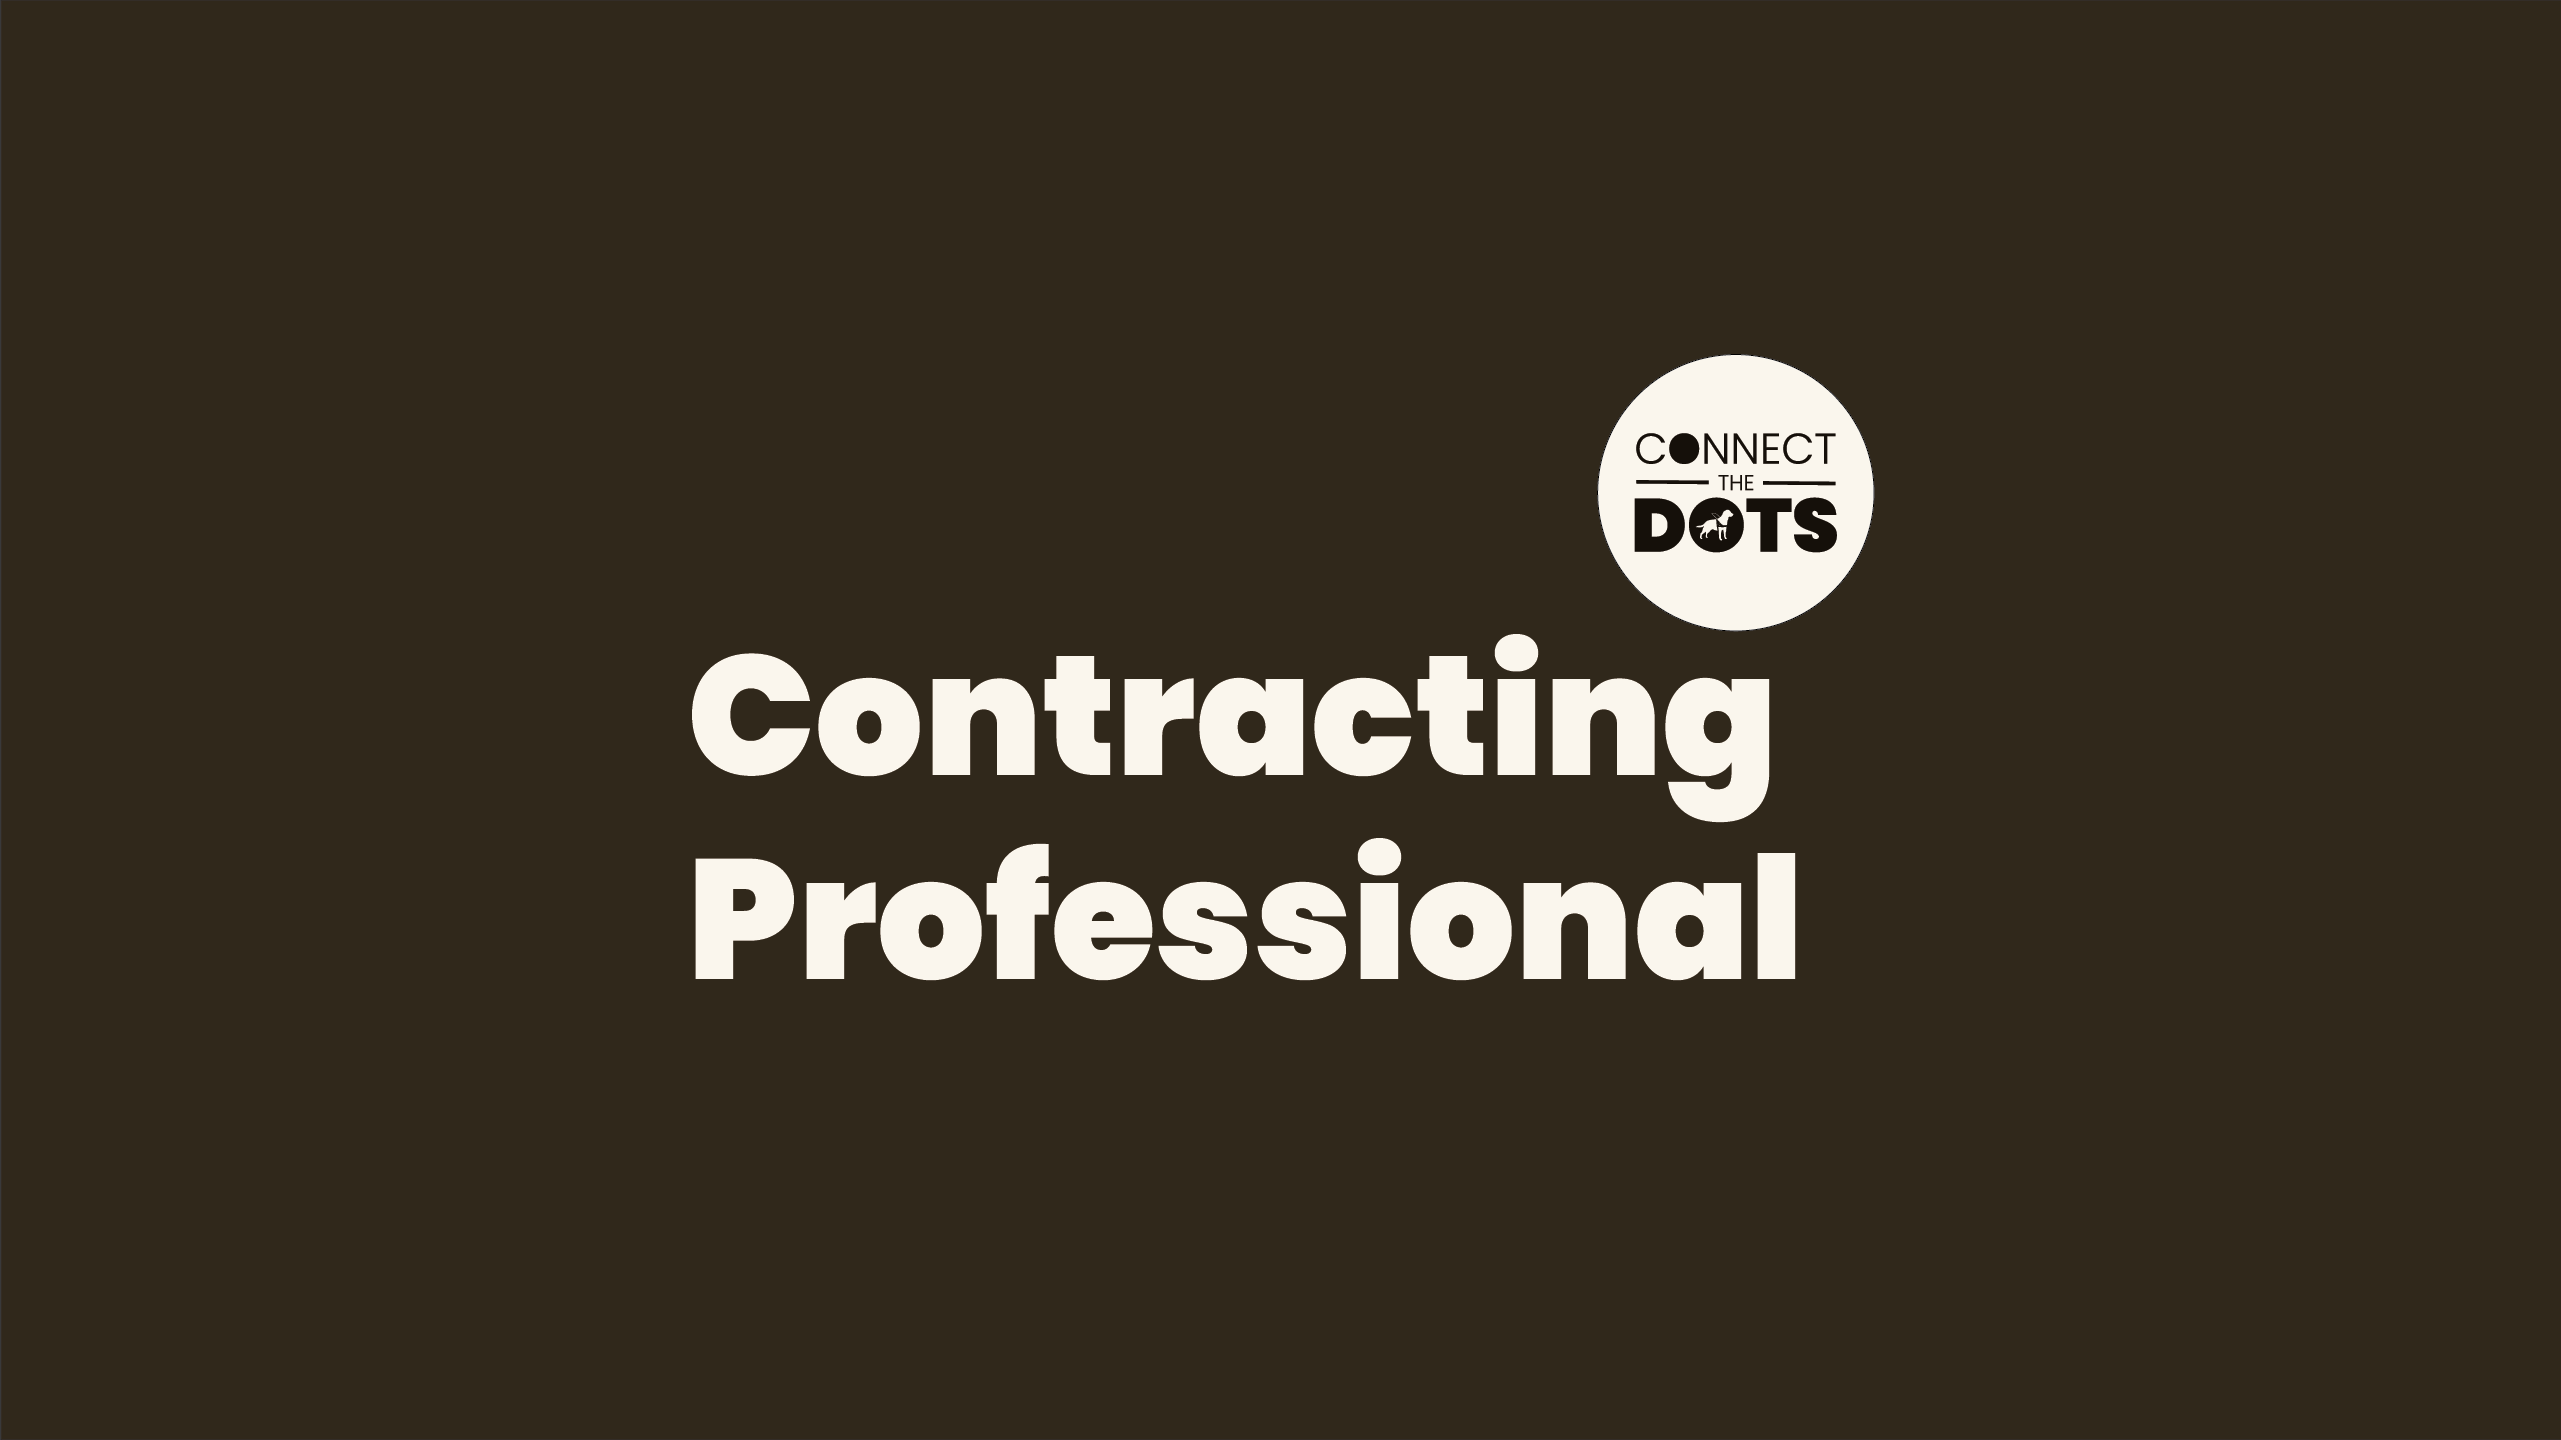 Contracting Professional - Blind and Visually Impaired Professionals